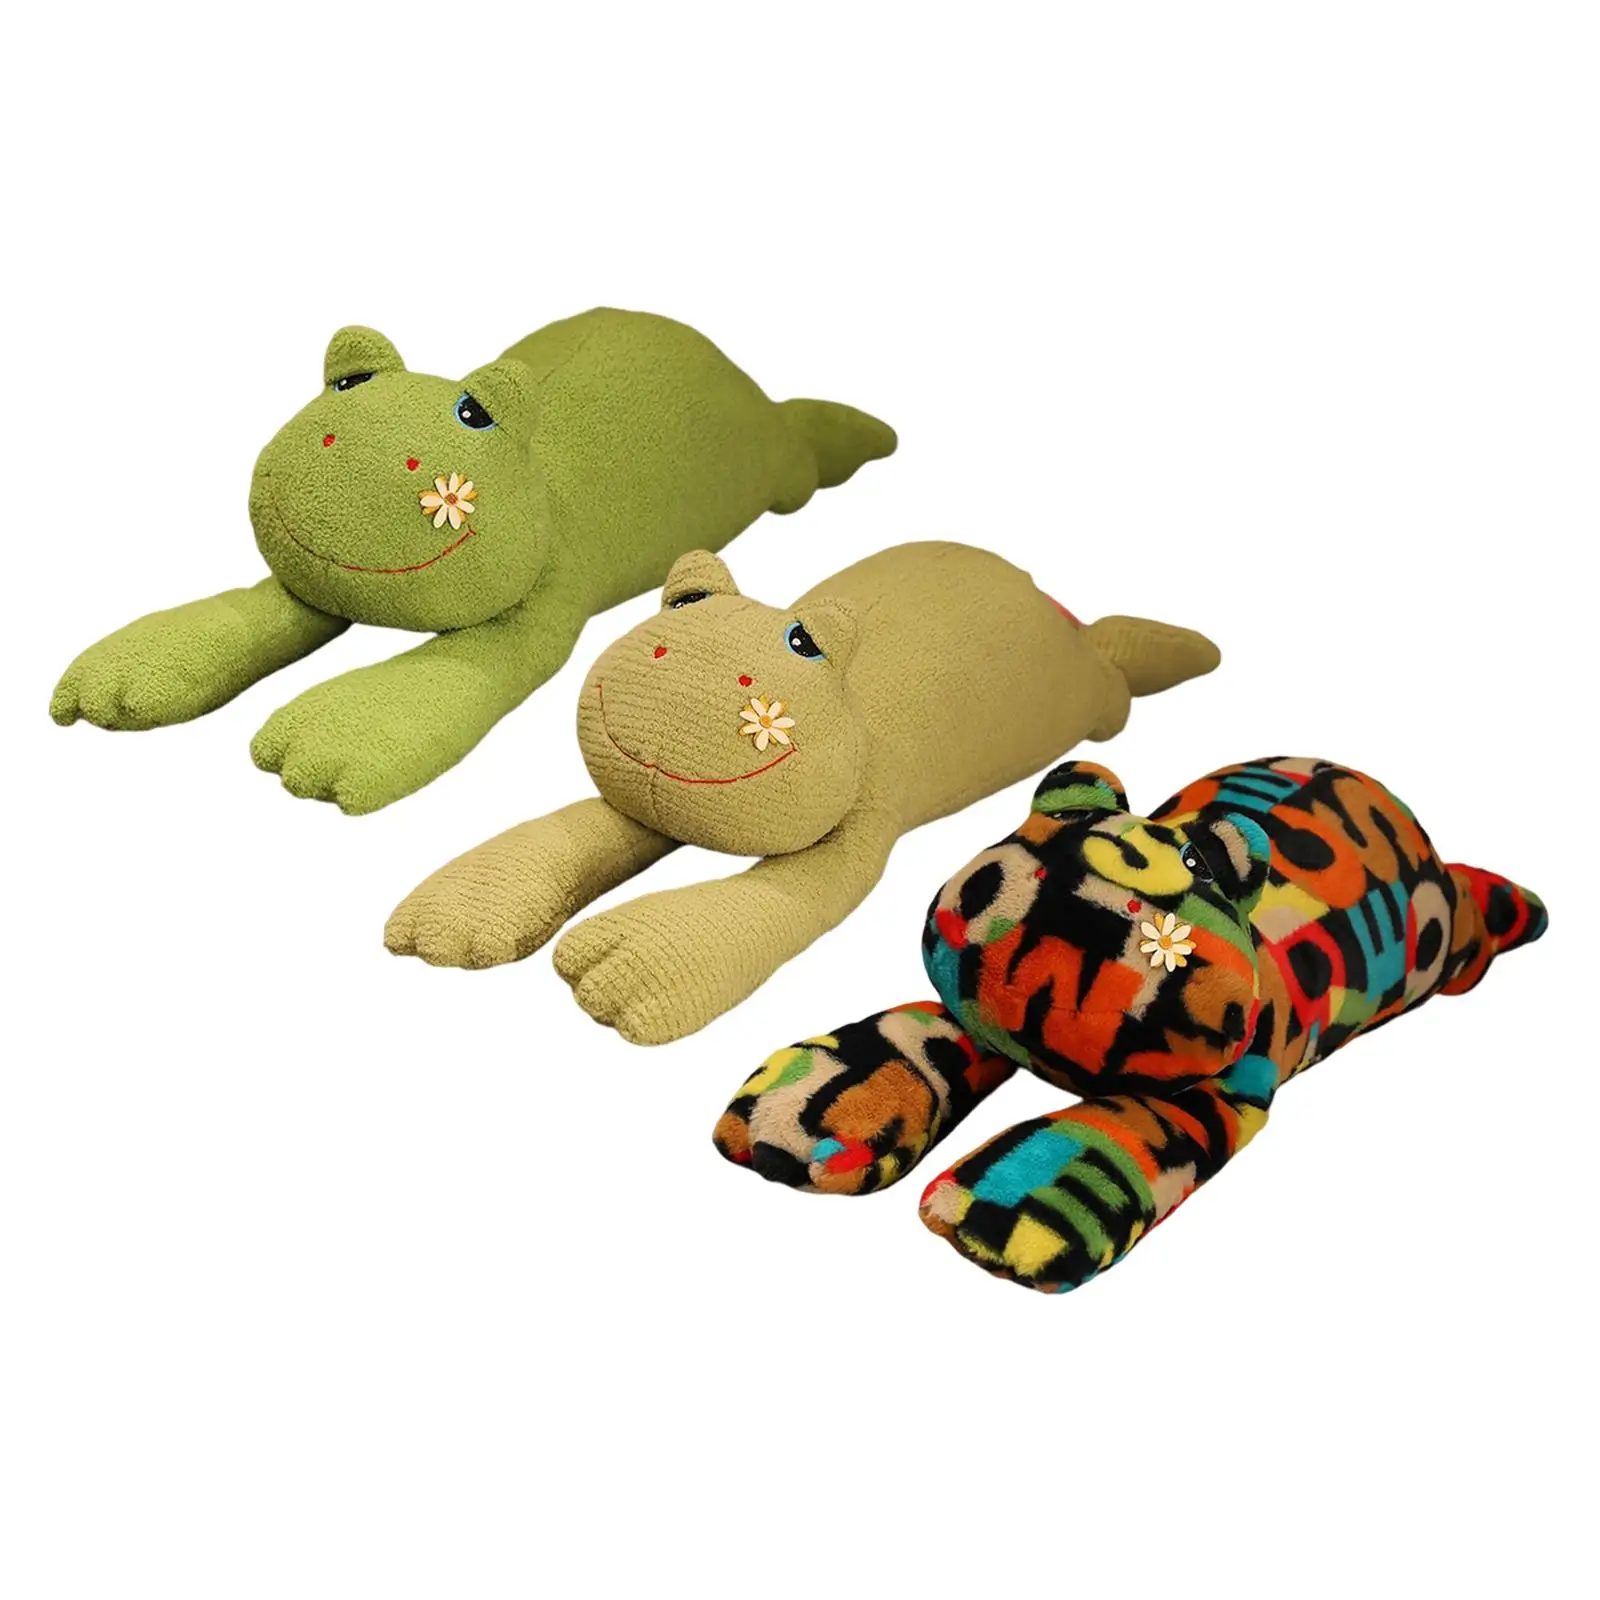 Cuddly Frog Plush doll home Decoration Cushion Cute for Theme Party Toddlers